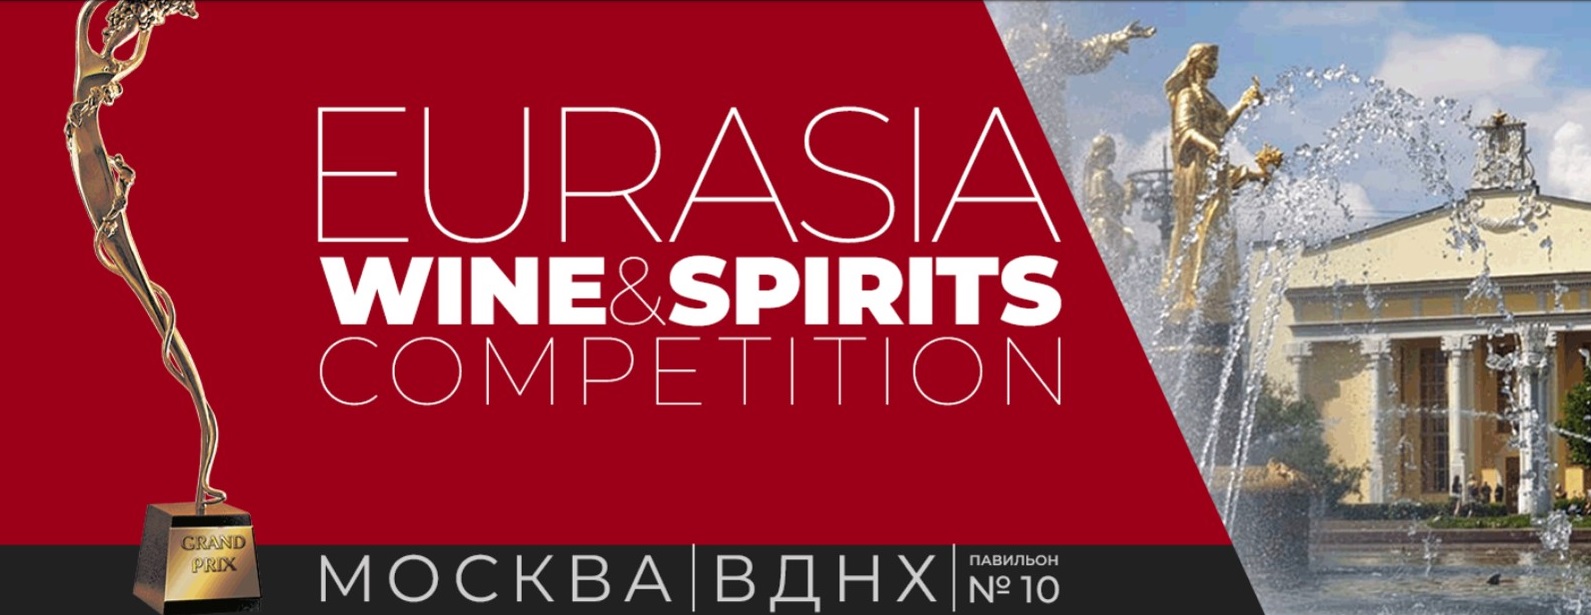 Eurasia Wine and Spirits Competition 2021